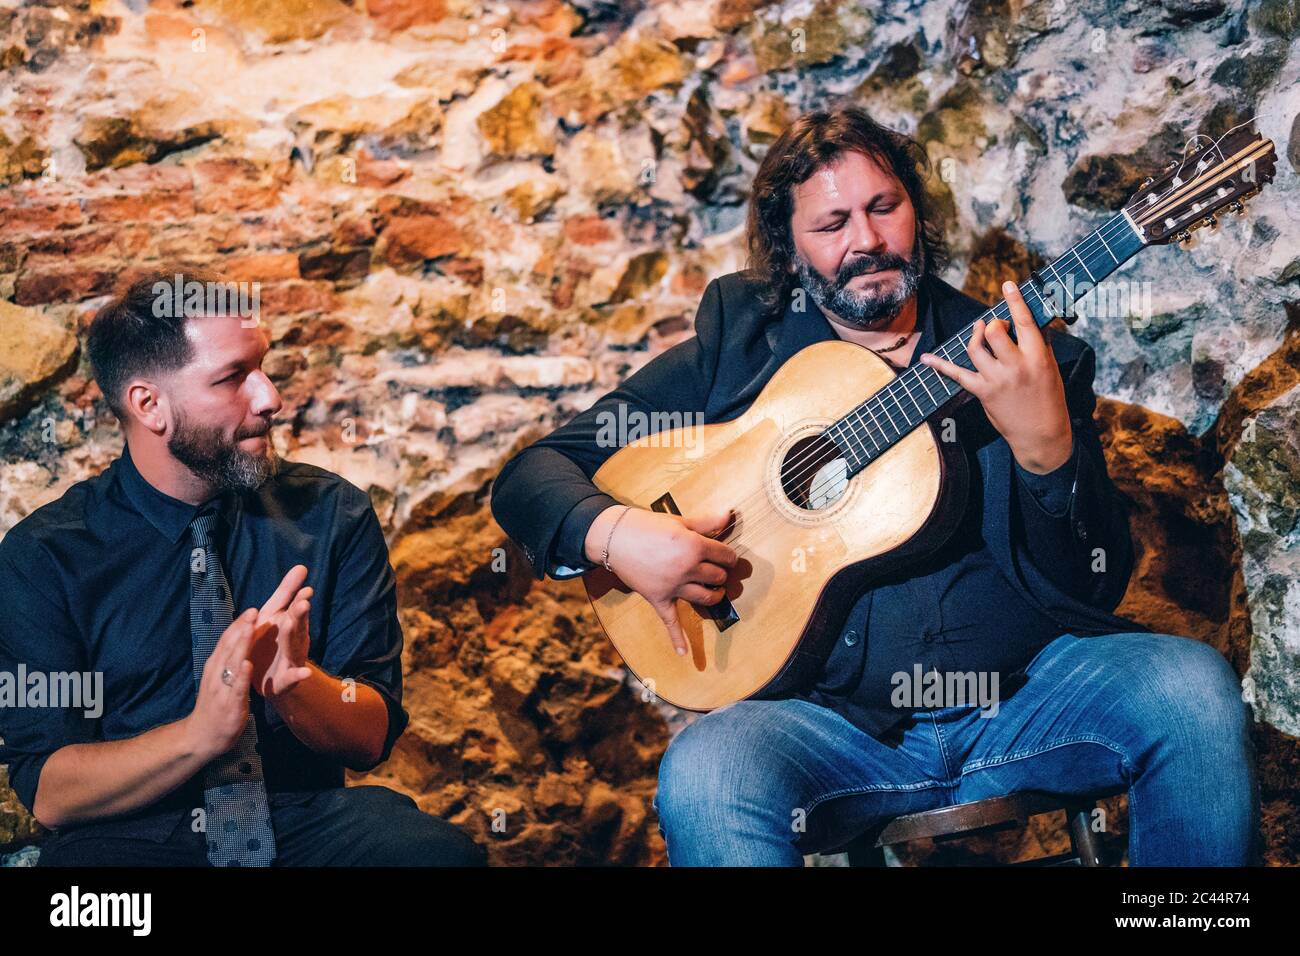 Singer clapping hands while man playing flamenco on guitar against wall in club Stock Photo